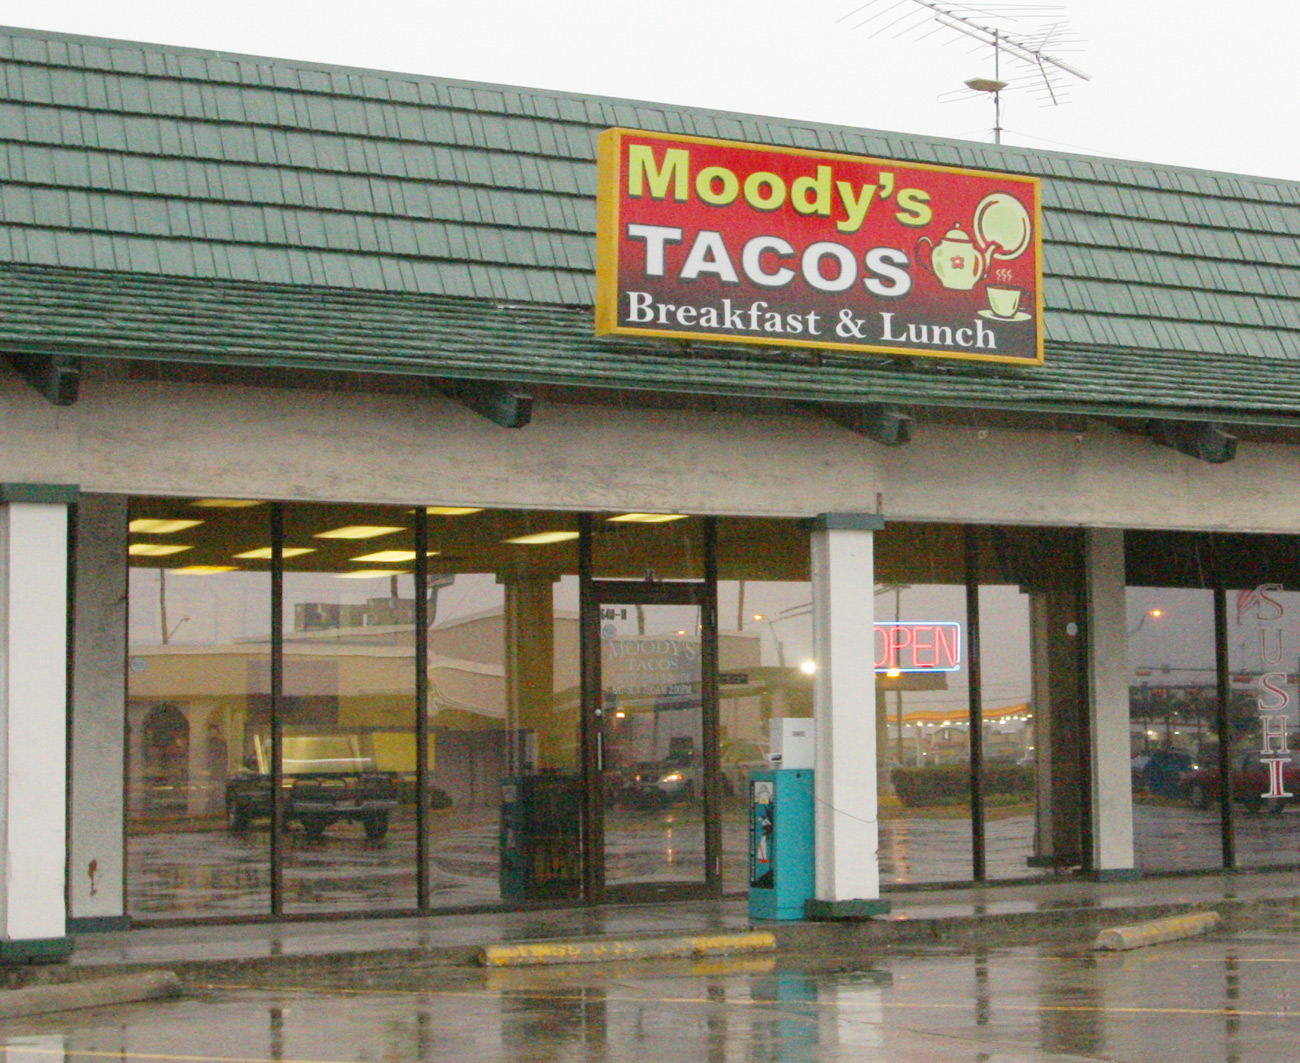 Moodys-Front